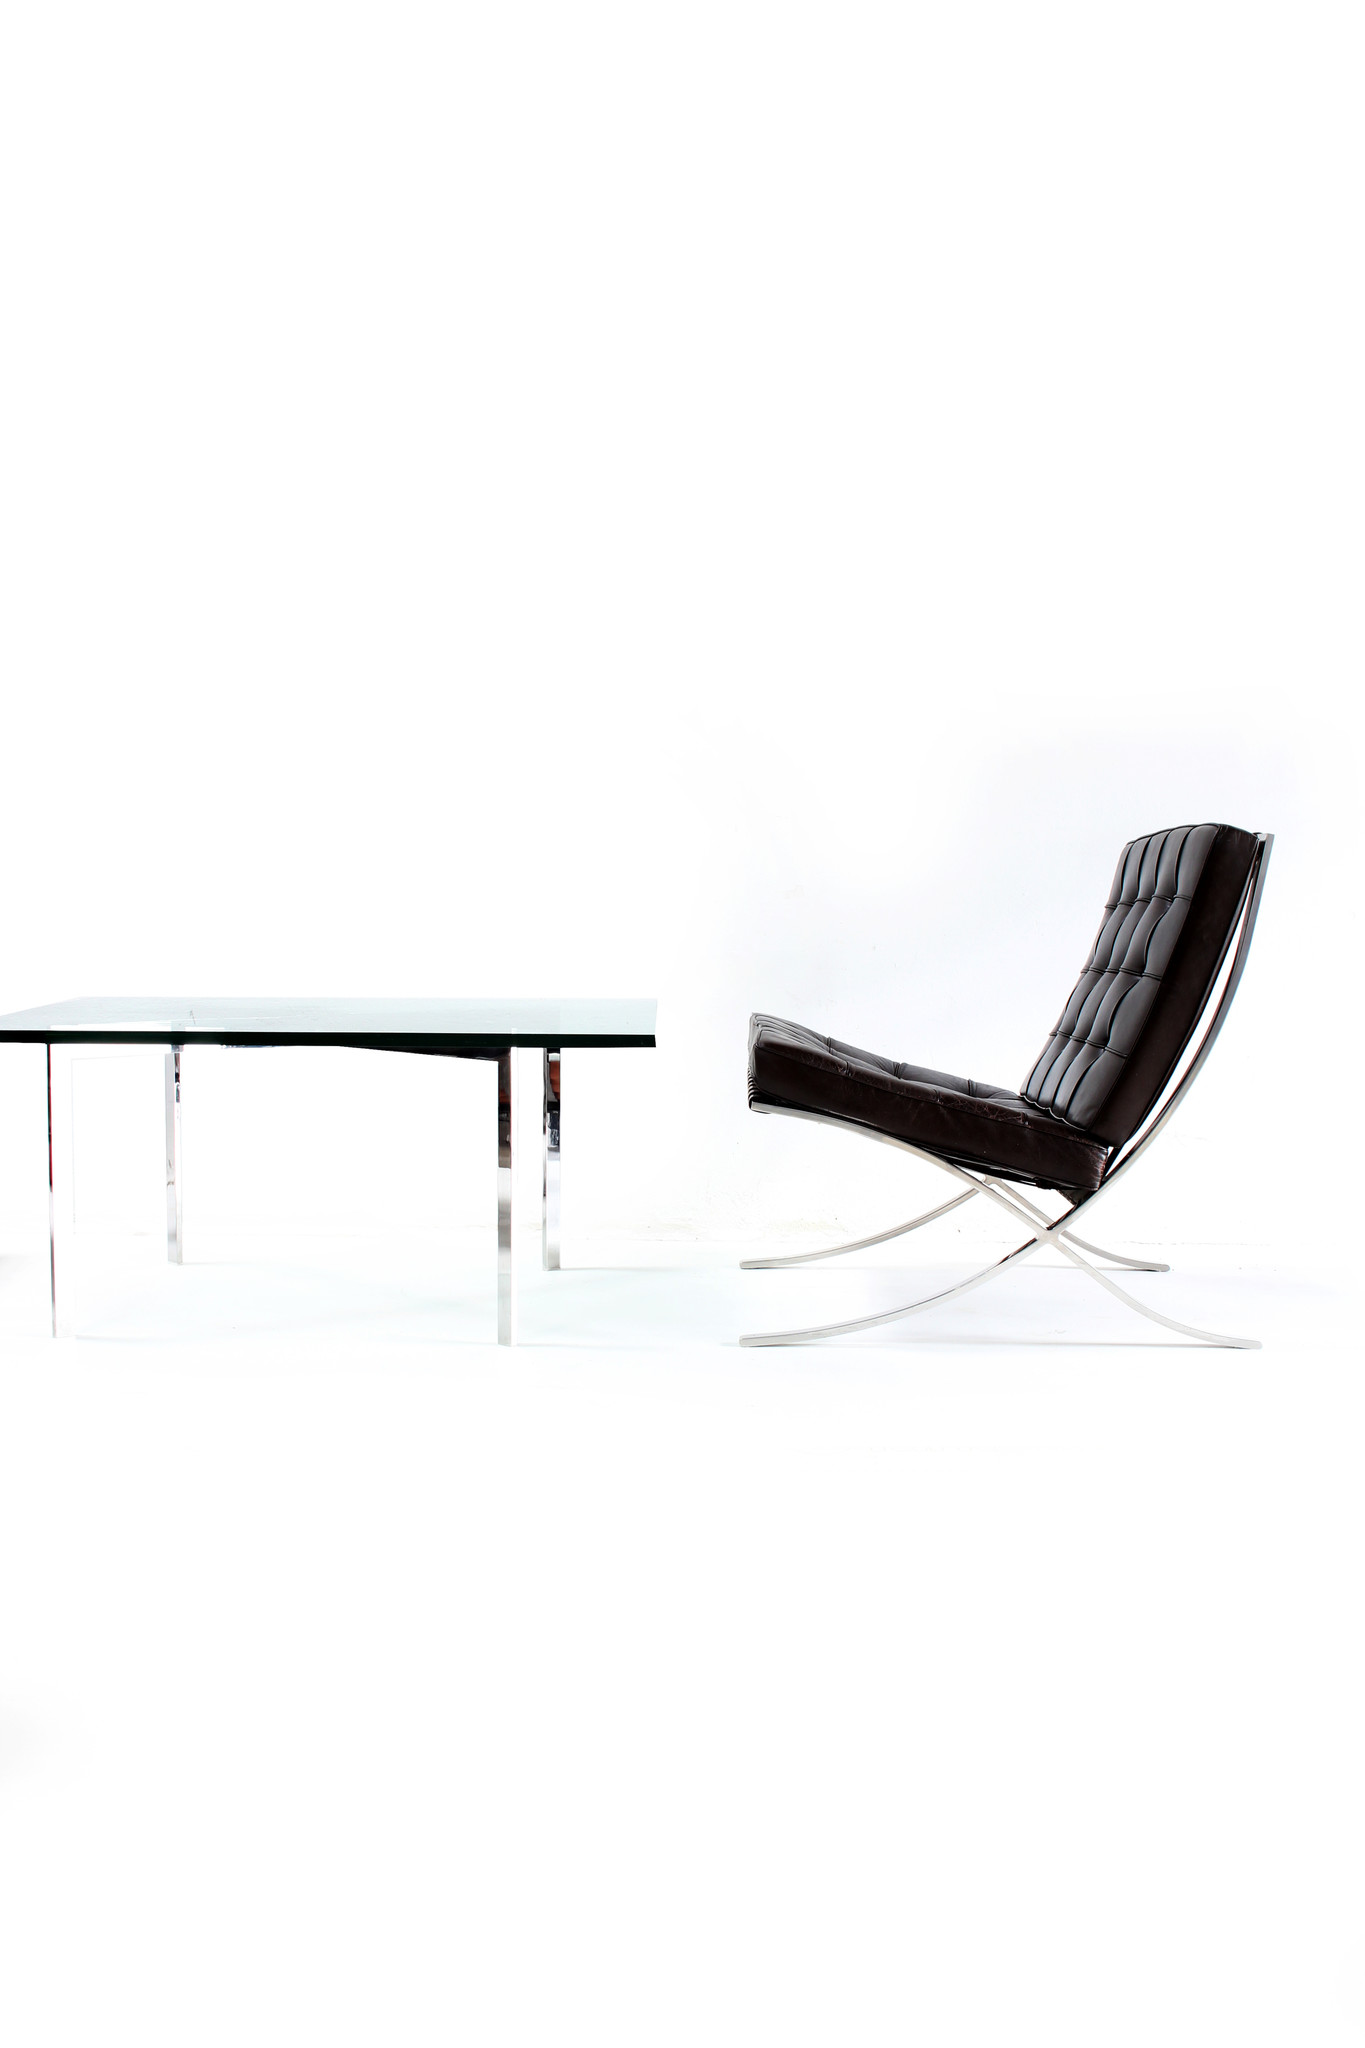 Pair of vintage Barcelona chairs by Ludwig Mies van der Rohe